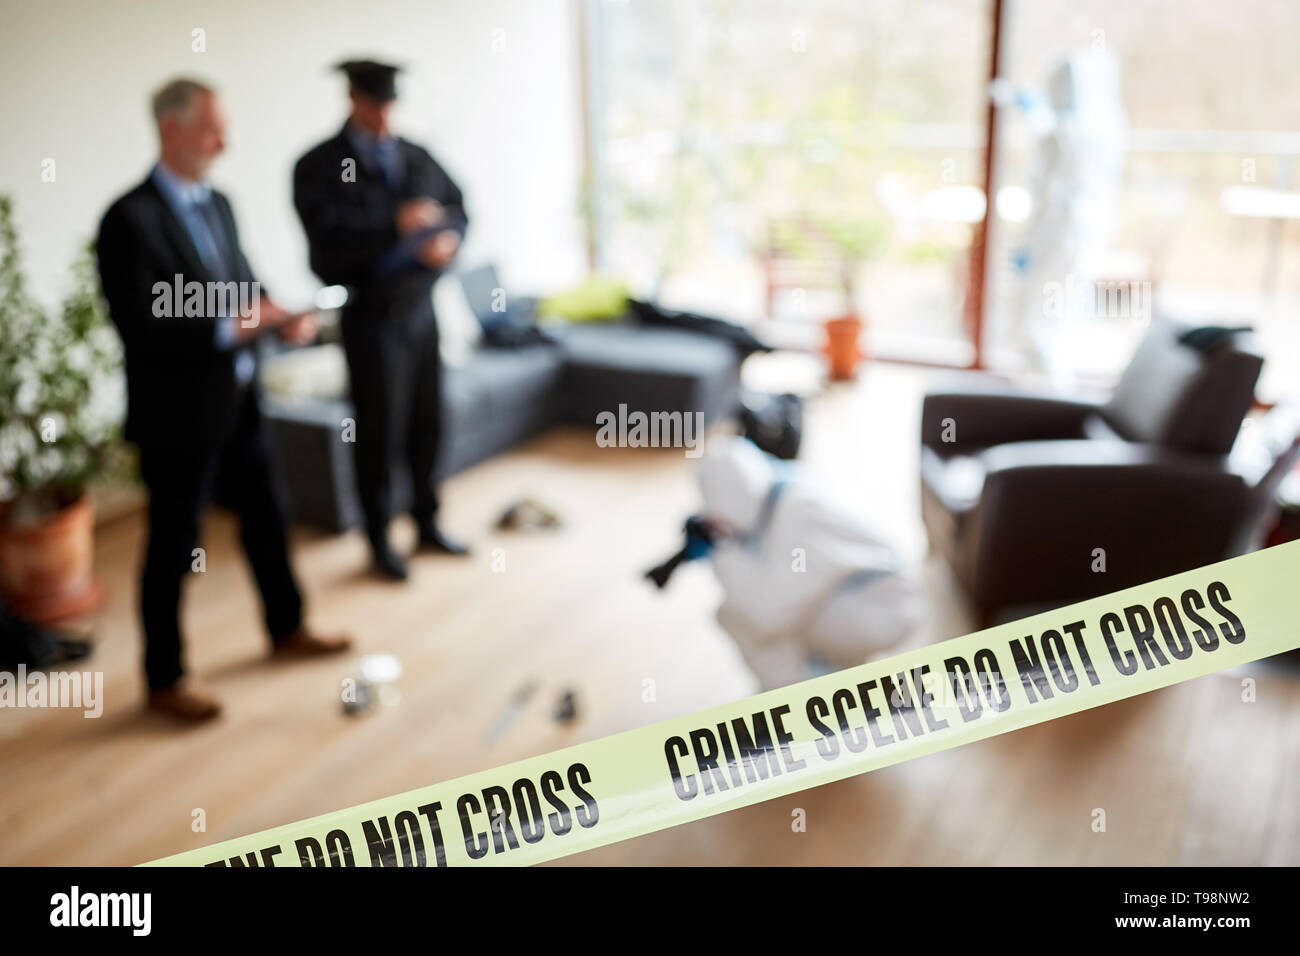 Forensic police investigates a crime scene after a crime Stock Photo